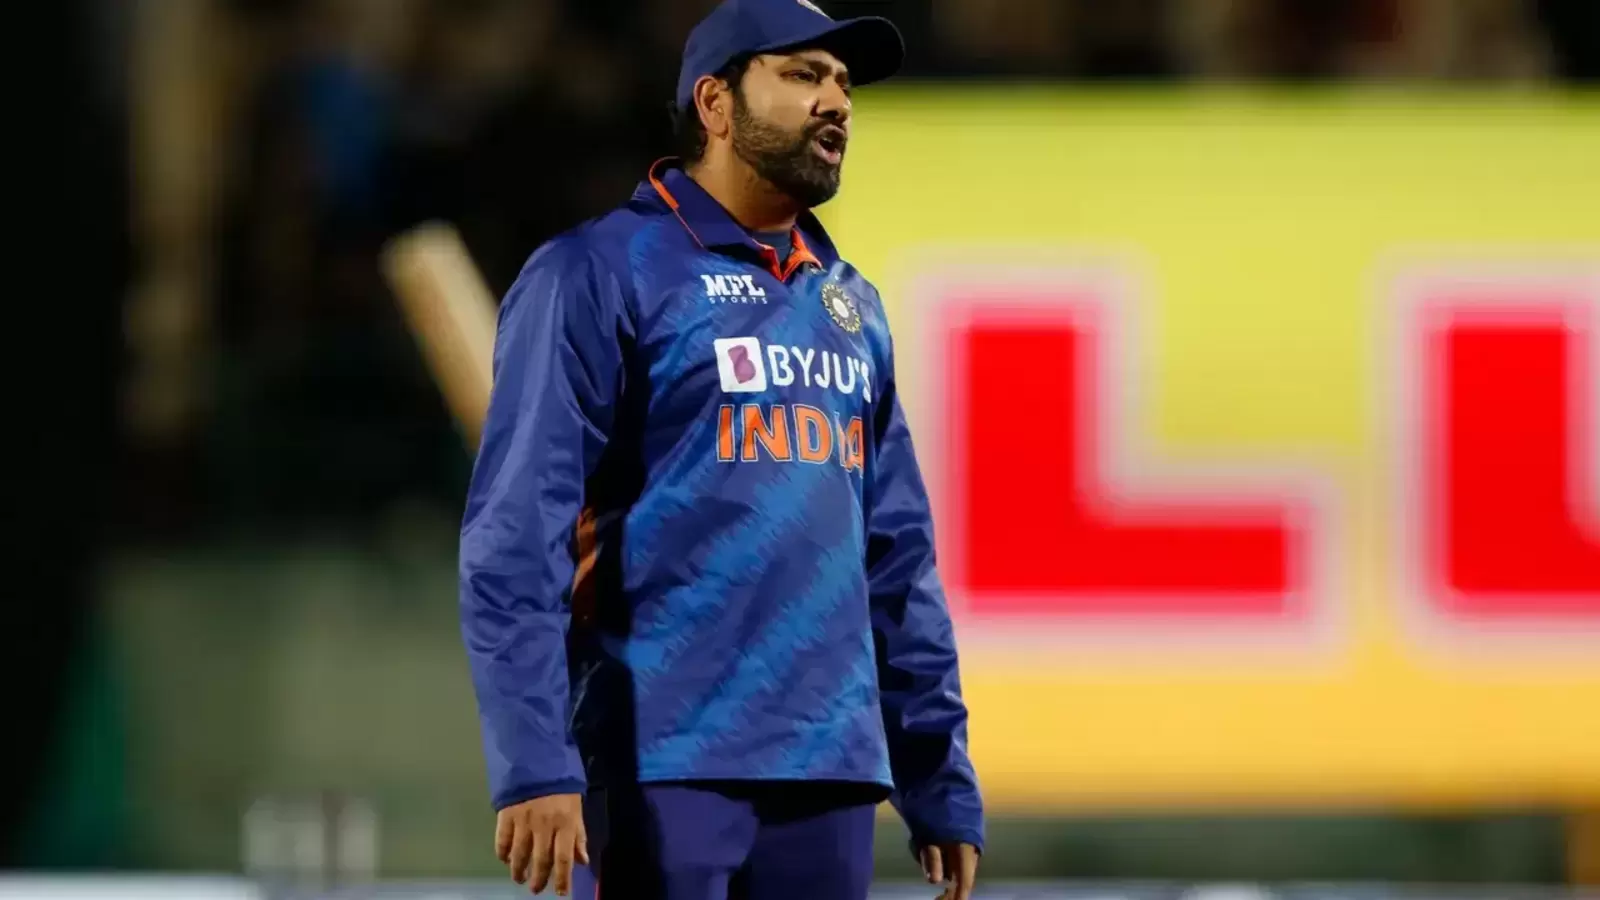 ‘He showed how well he could play’: Rohit Sharma impressed with ‘talented’ Indian star after 2nd T20 heroics